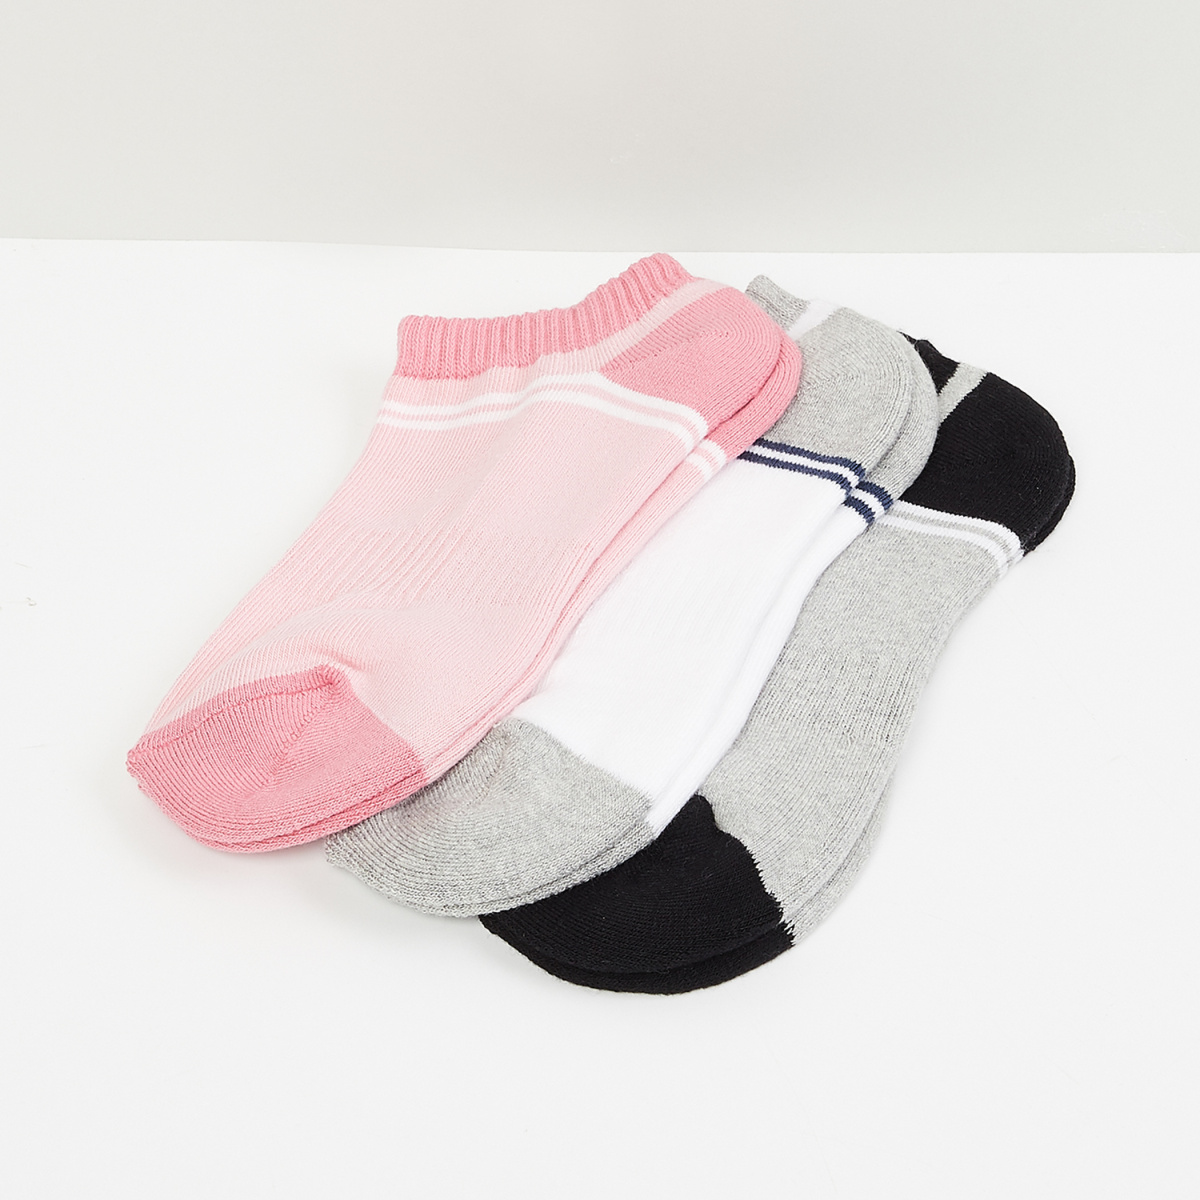 MAX Solid Patterened Socks- Set of 3